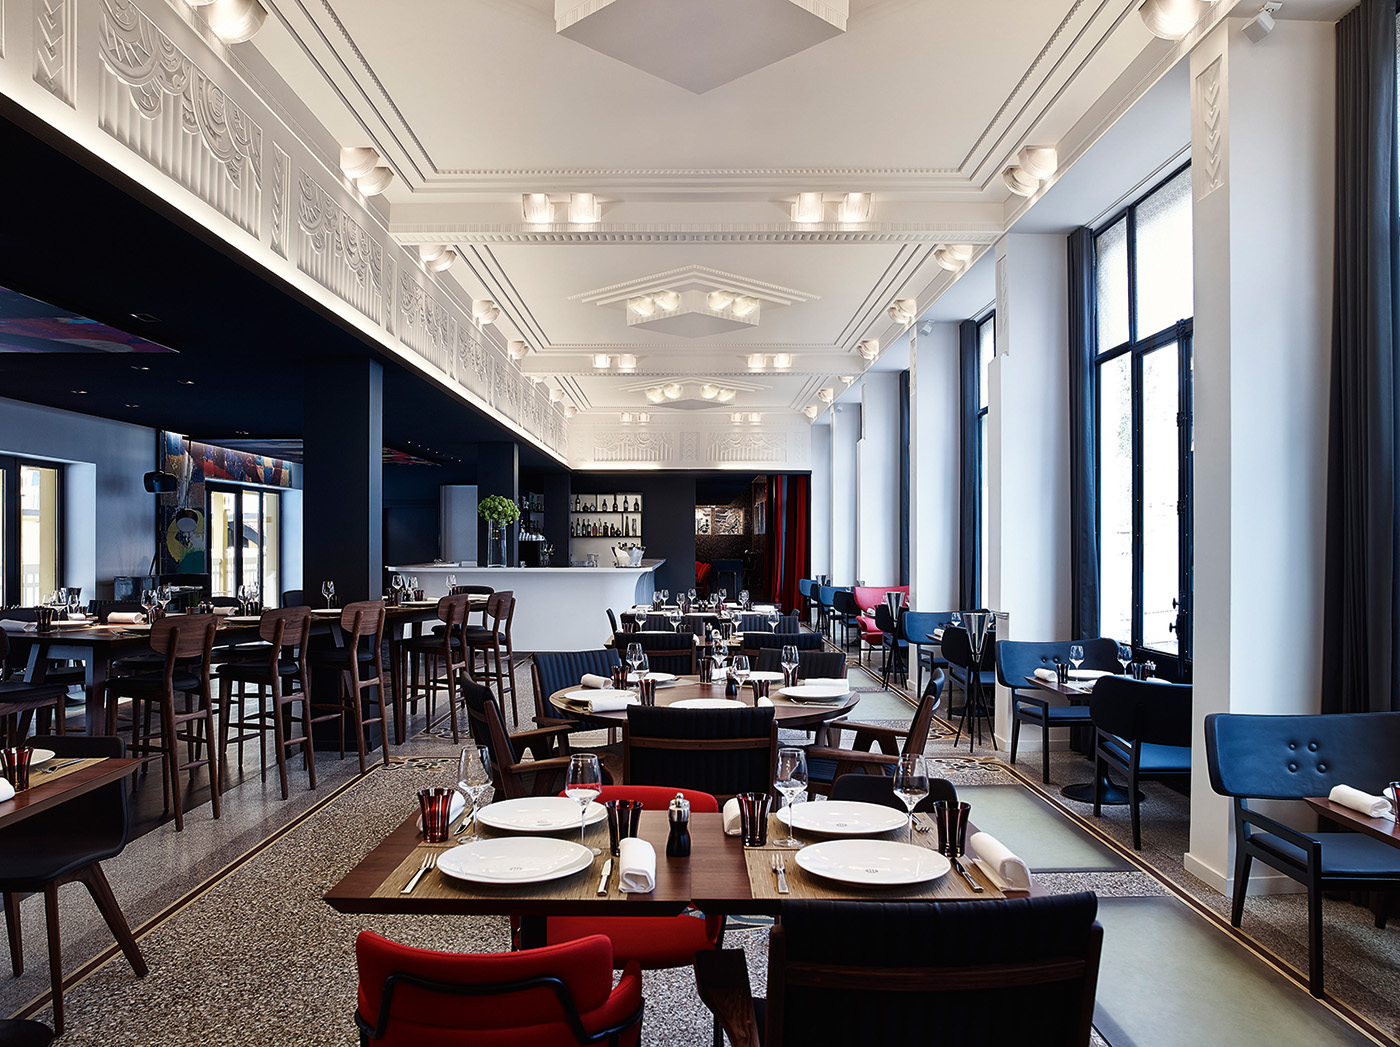 Room of the urban brasserie of the molitor hotel in Paris, luxury lifestyle hotel designed by the interior design studio jean-philippe nuel, interior design inspired by streetart